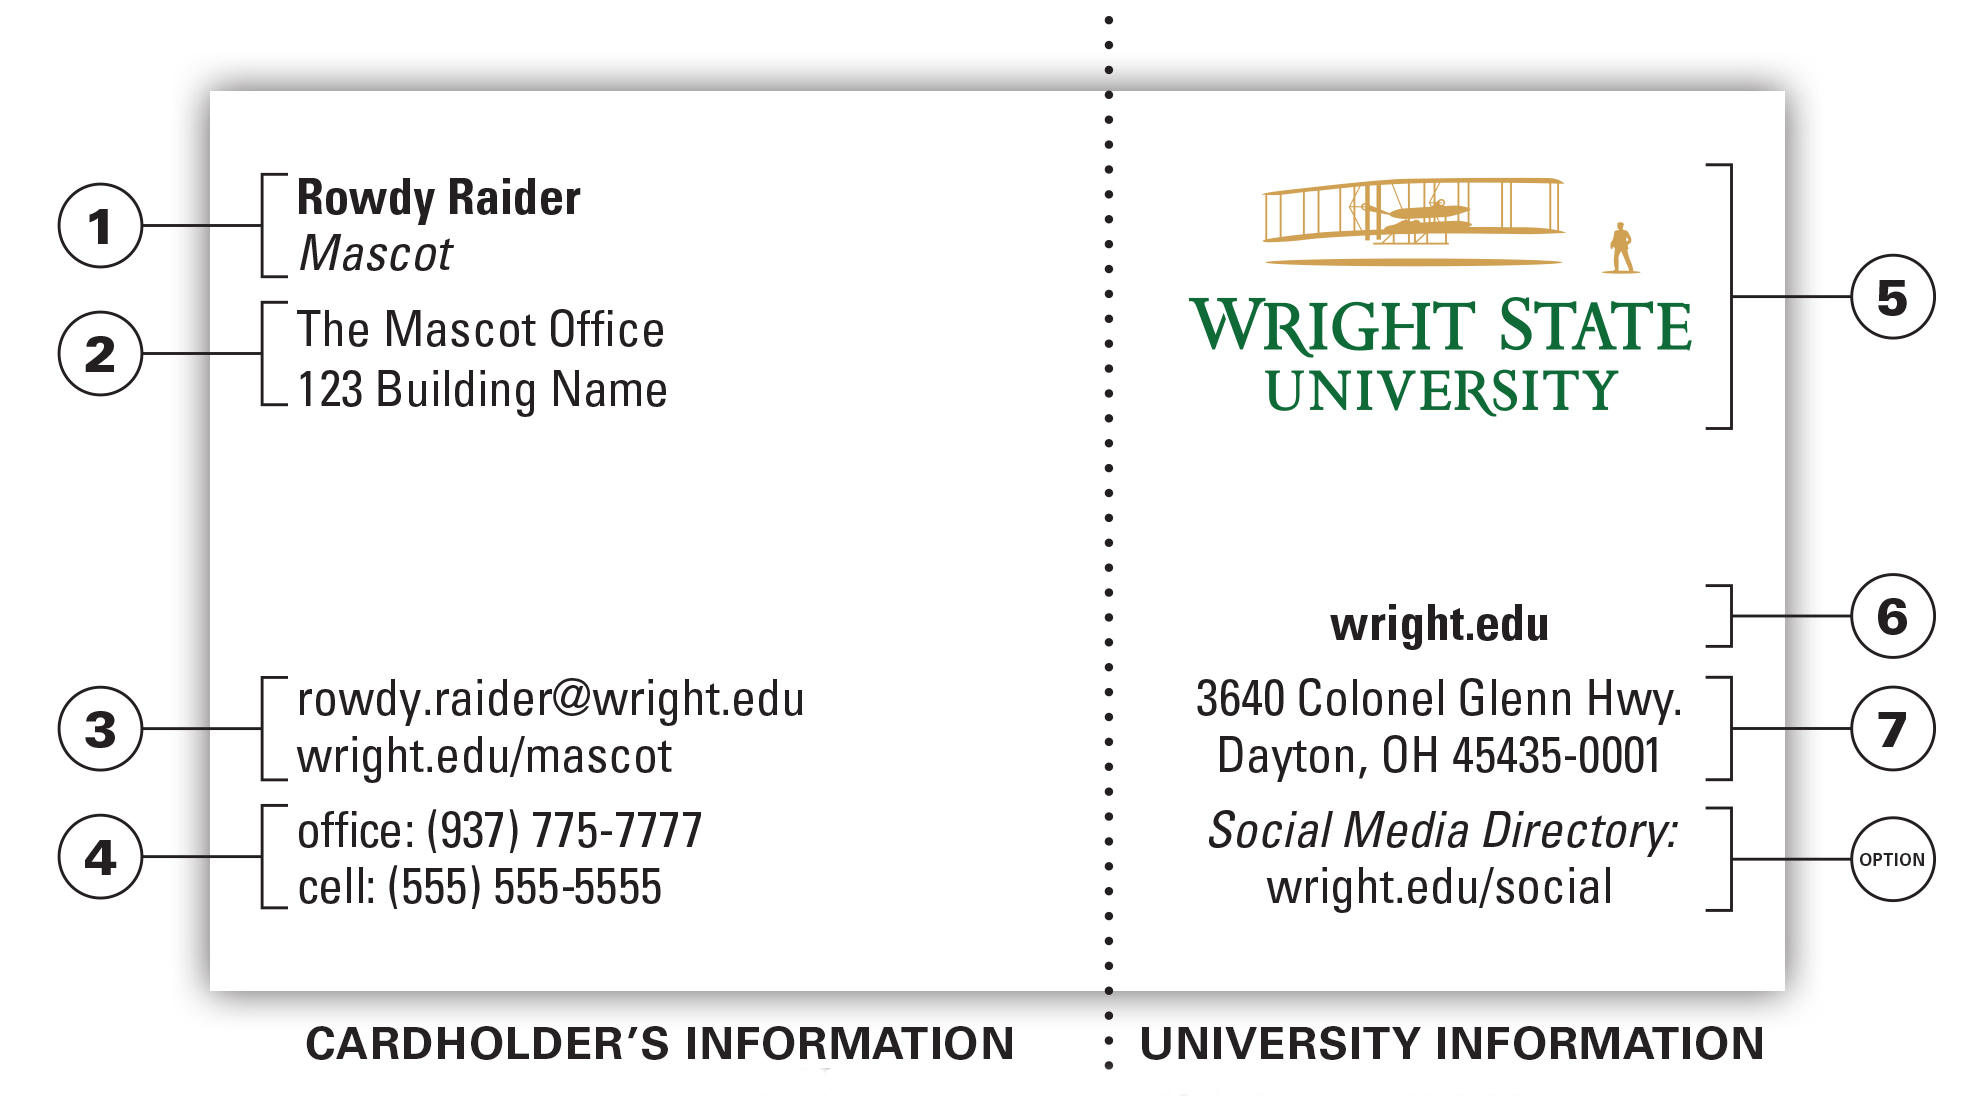 Wright State University Business Card Template with Social Media Directory